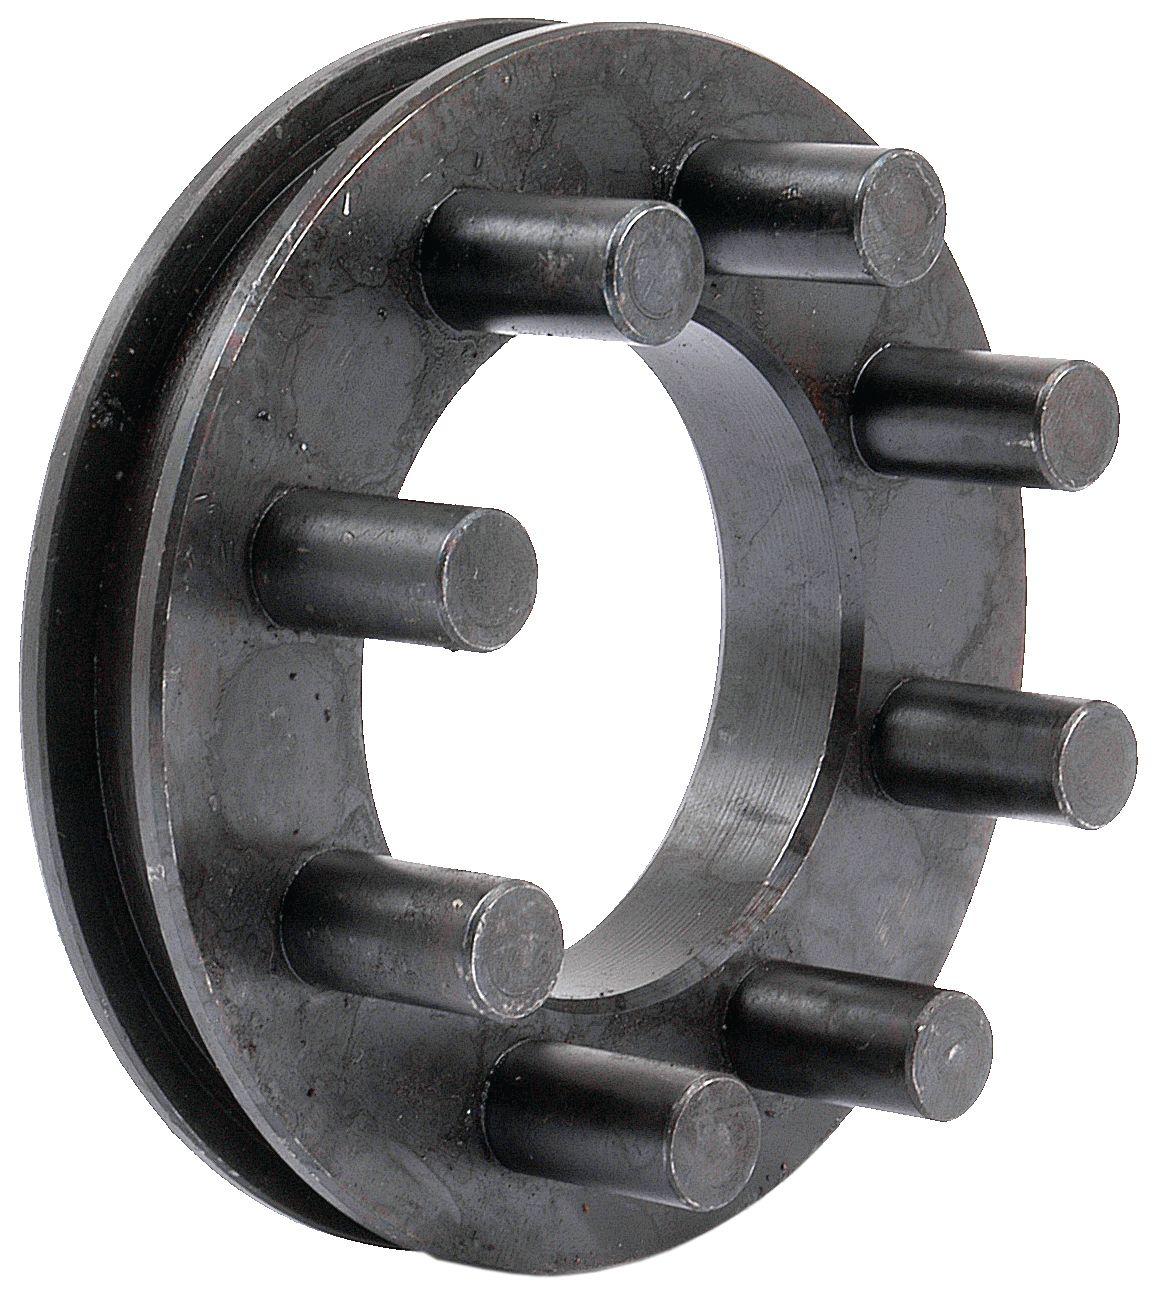 LONG TRACTOR COUPLING 59133